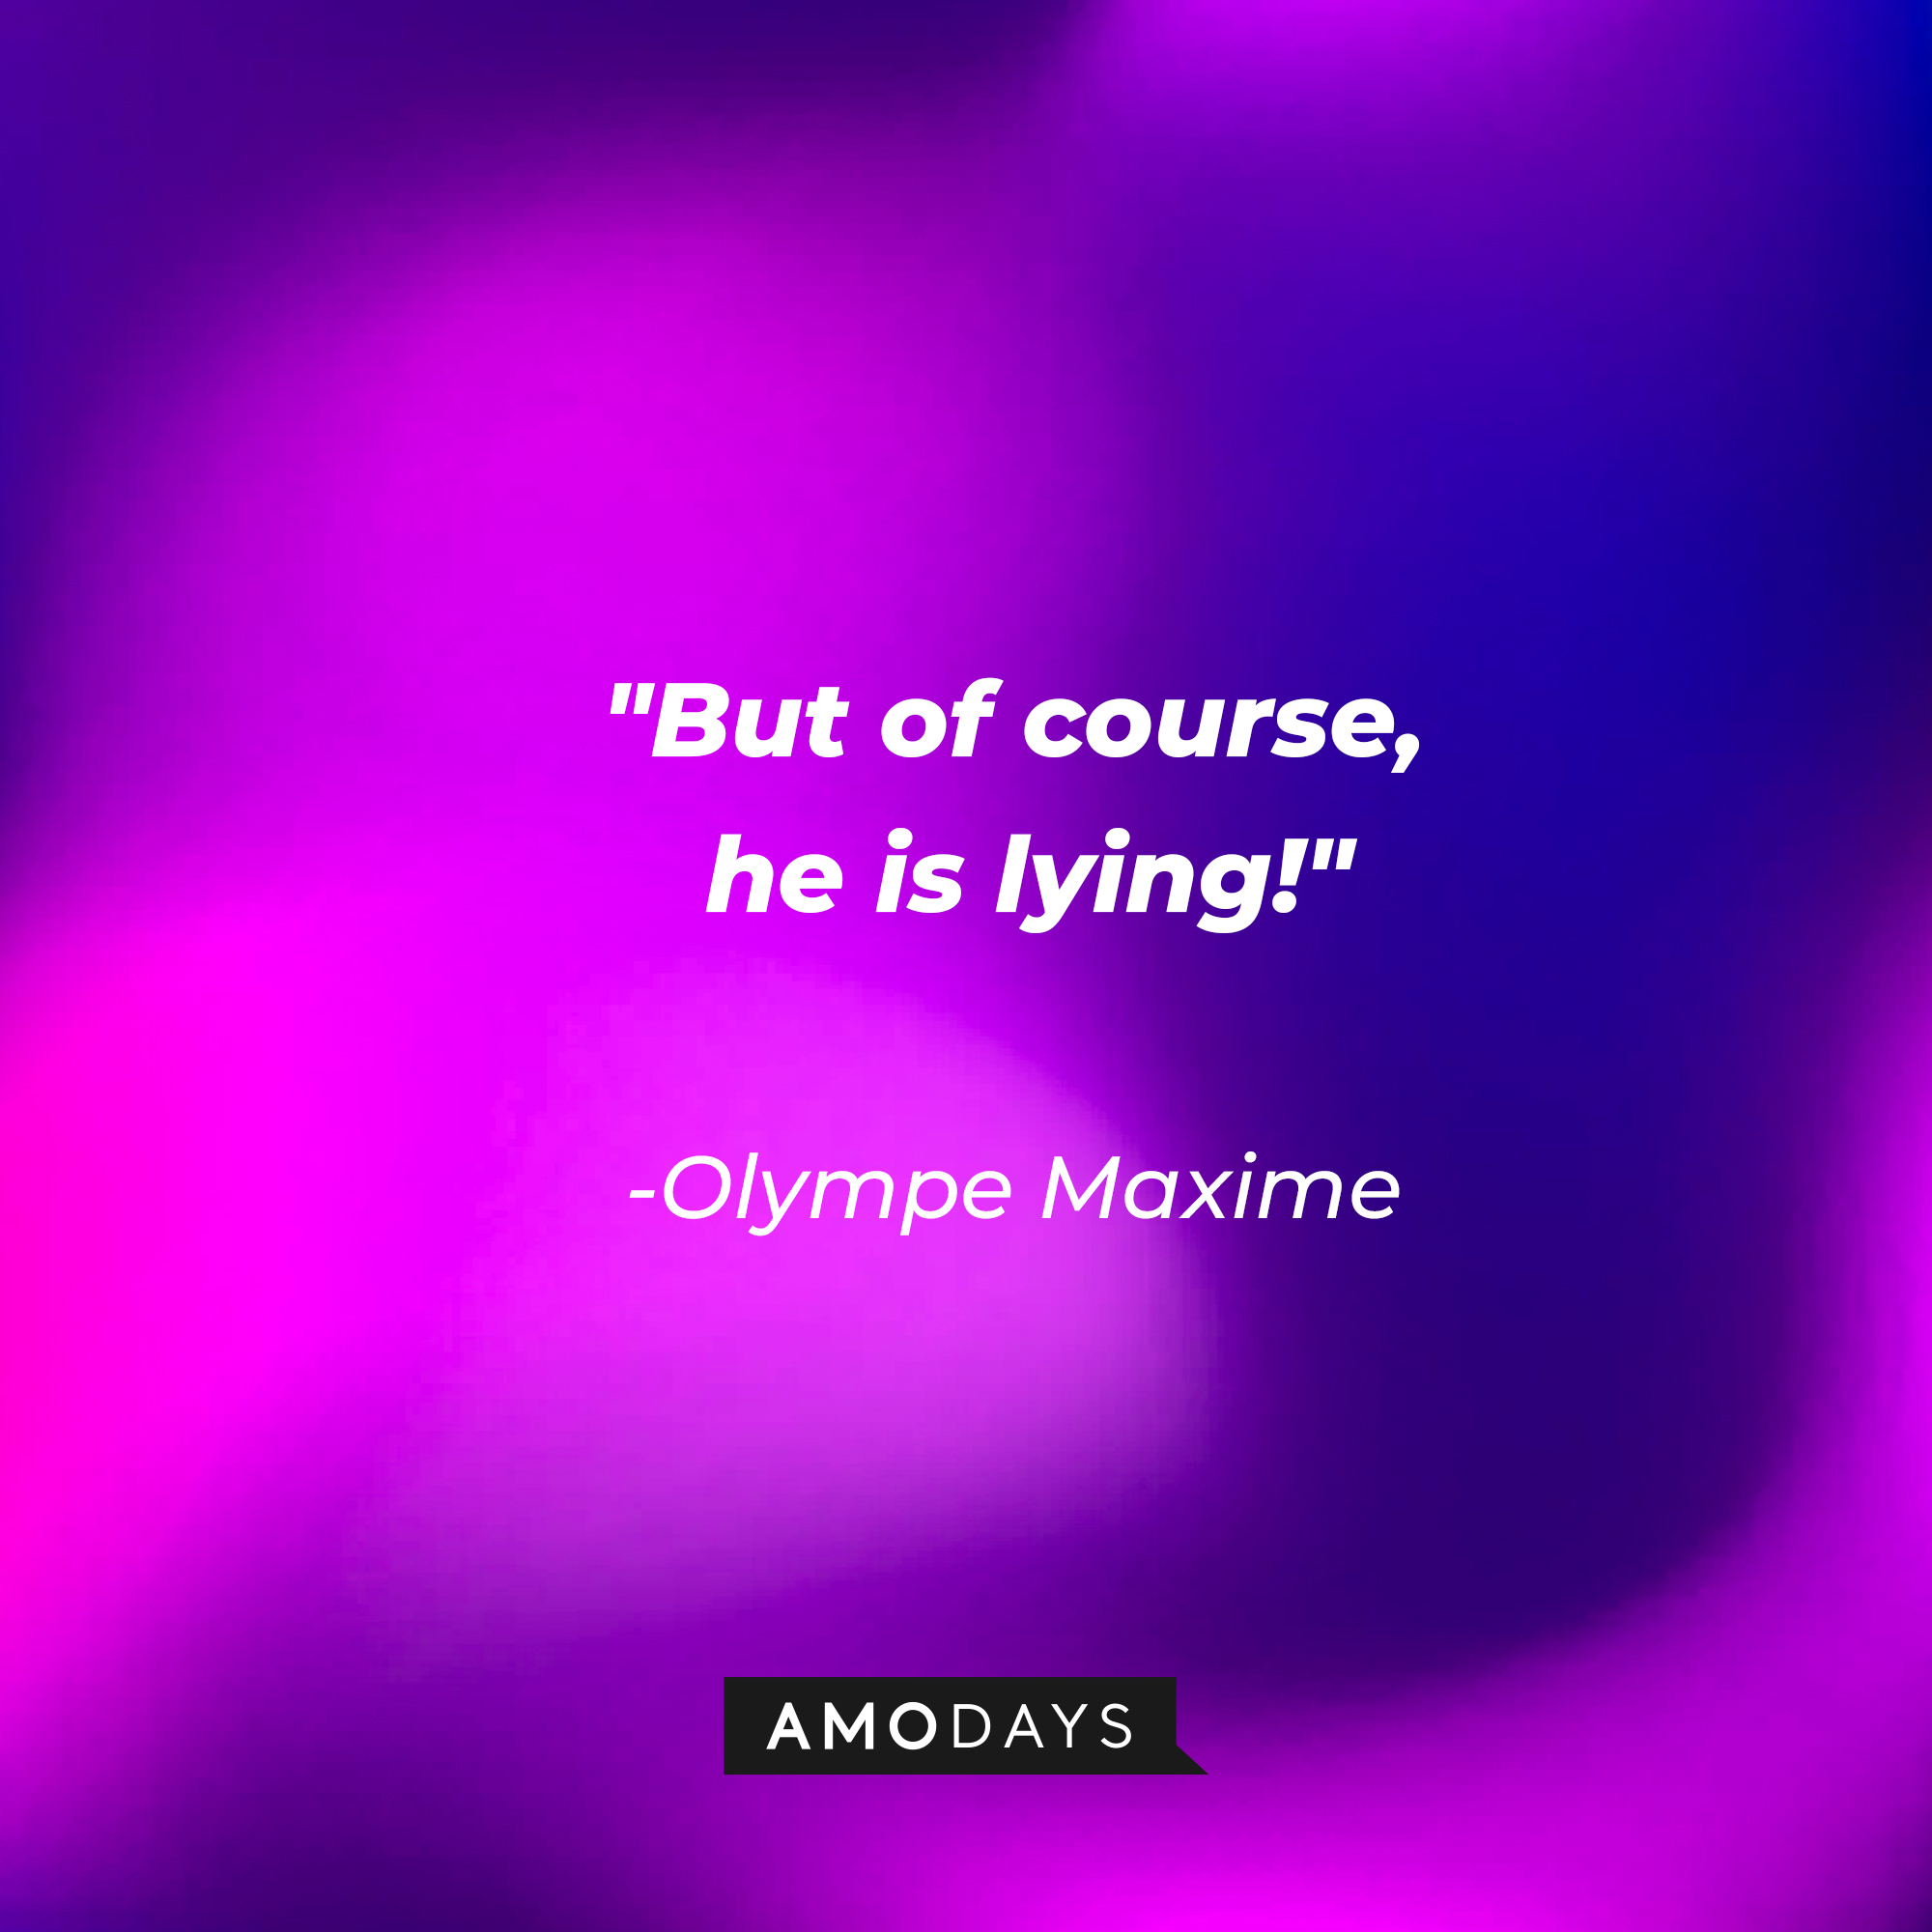 Olympe Maxine's quote: "But of course, he is lying!" | Image: Amodays